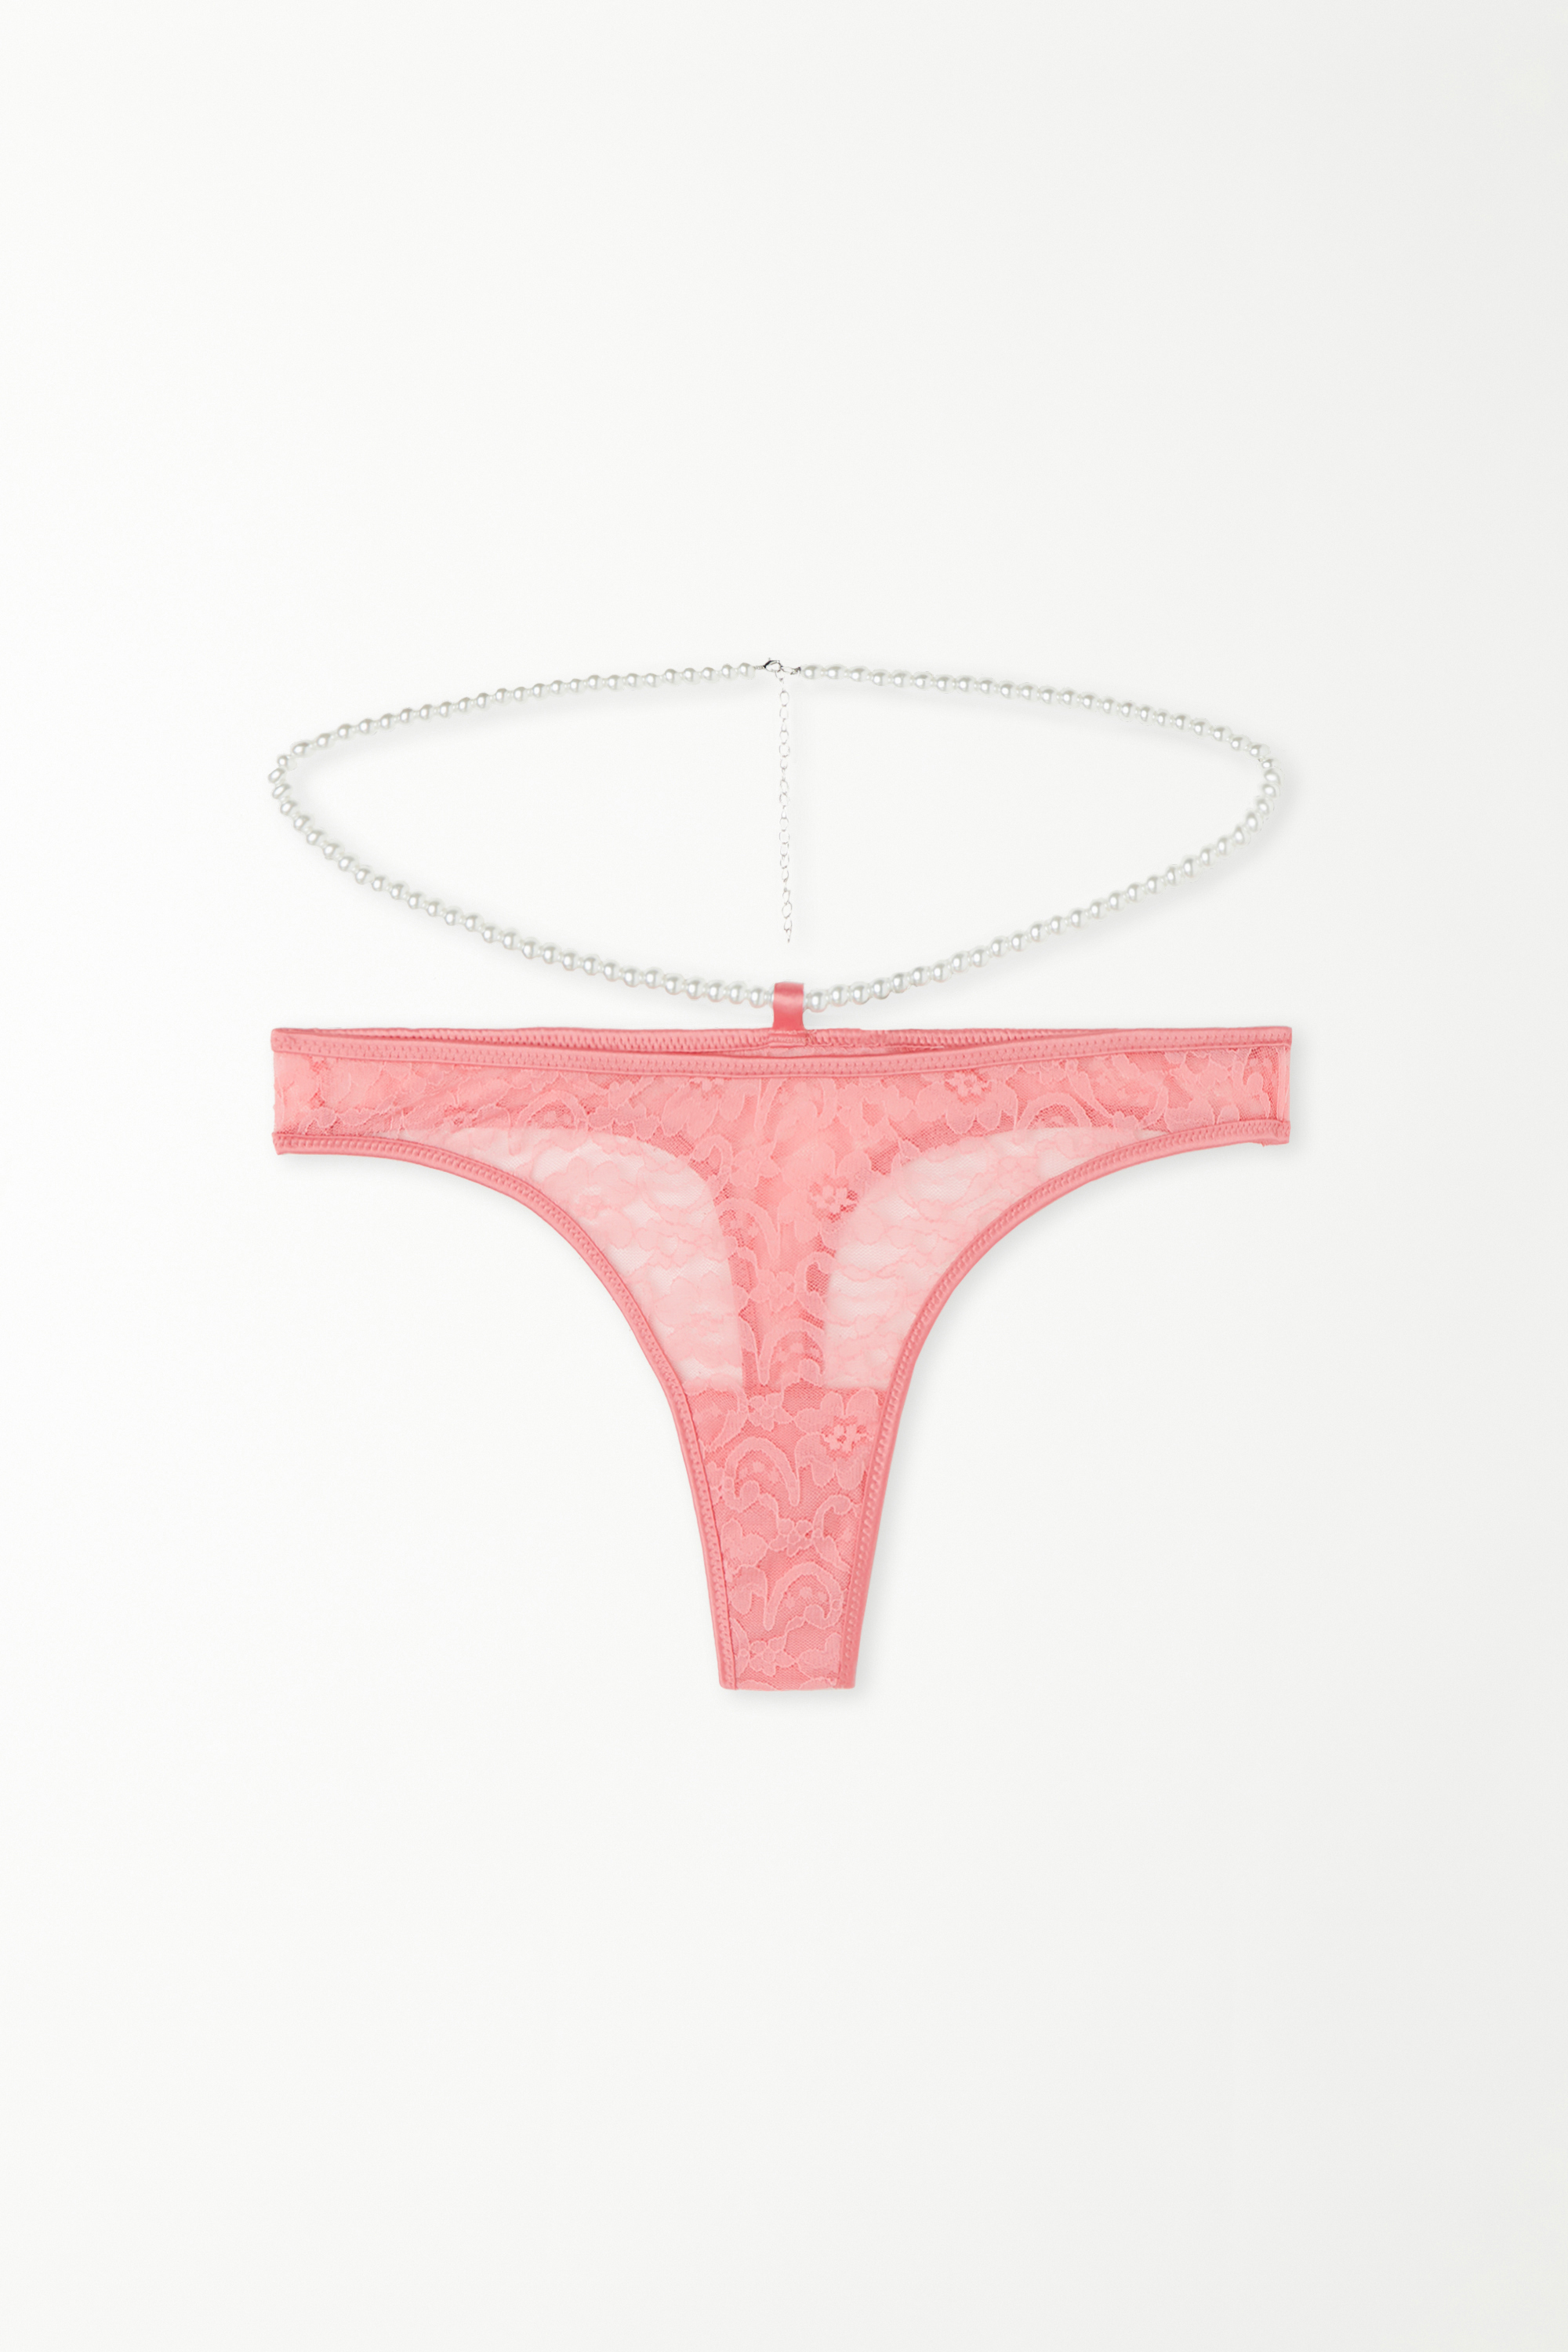 Pearl Pink Lace G-String